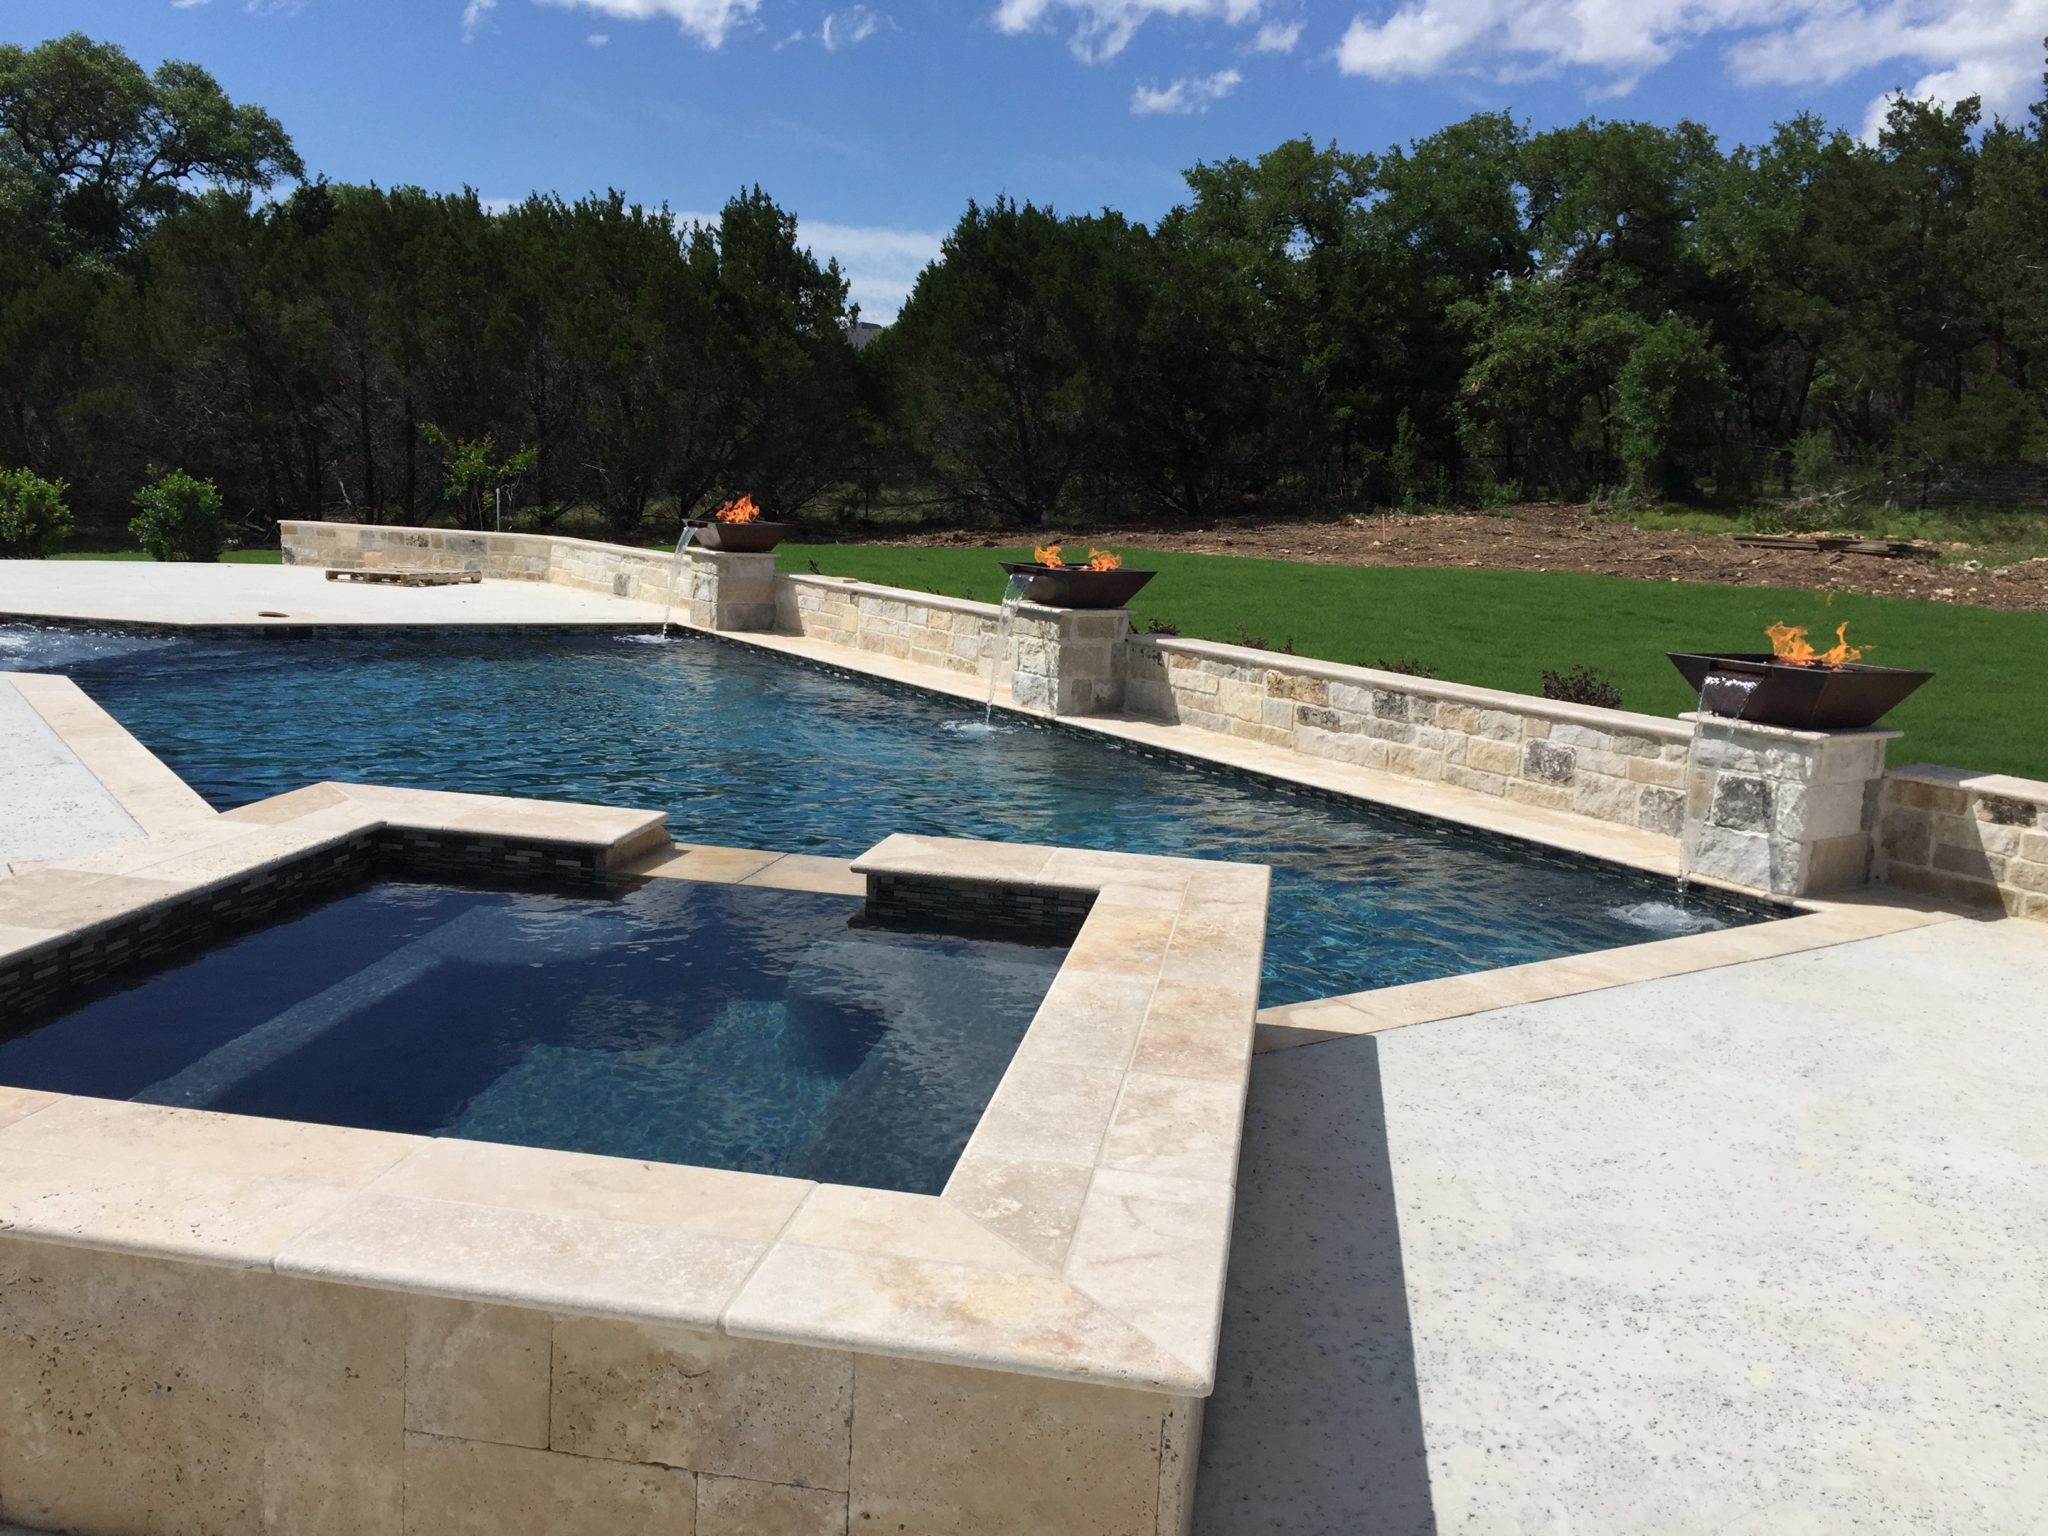 Inground Pool Construction Process for Custom Swimming Pools in NJ